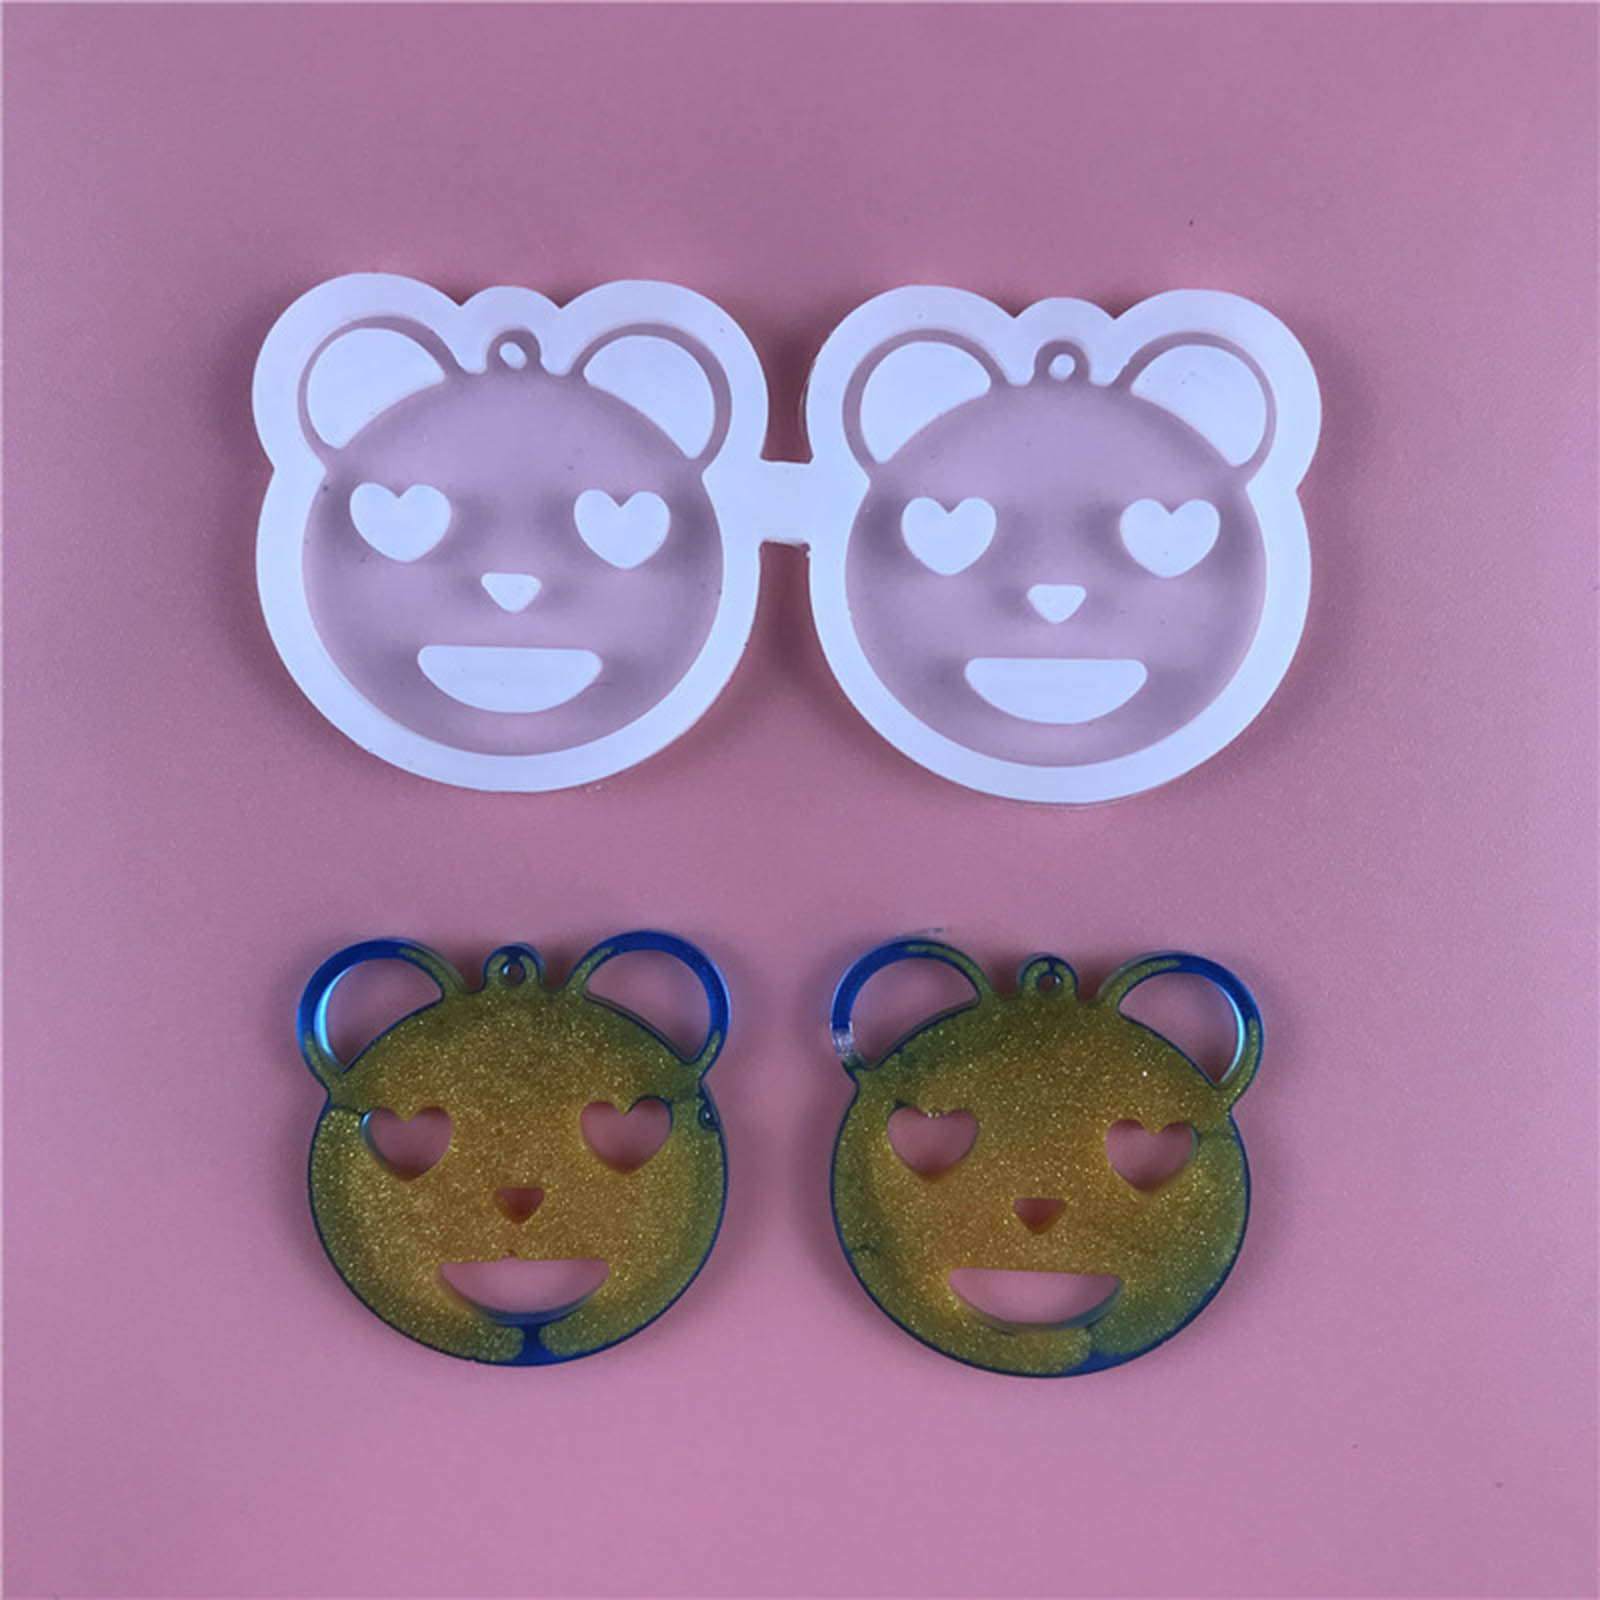 Picture of Silicone Resin Mold For Jewelry Making Earring Pendant Bear Animal White 9cm x 4.5cm, 1 Piece